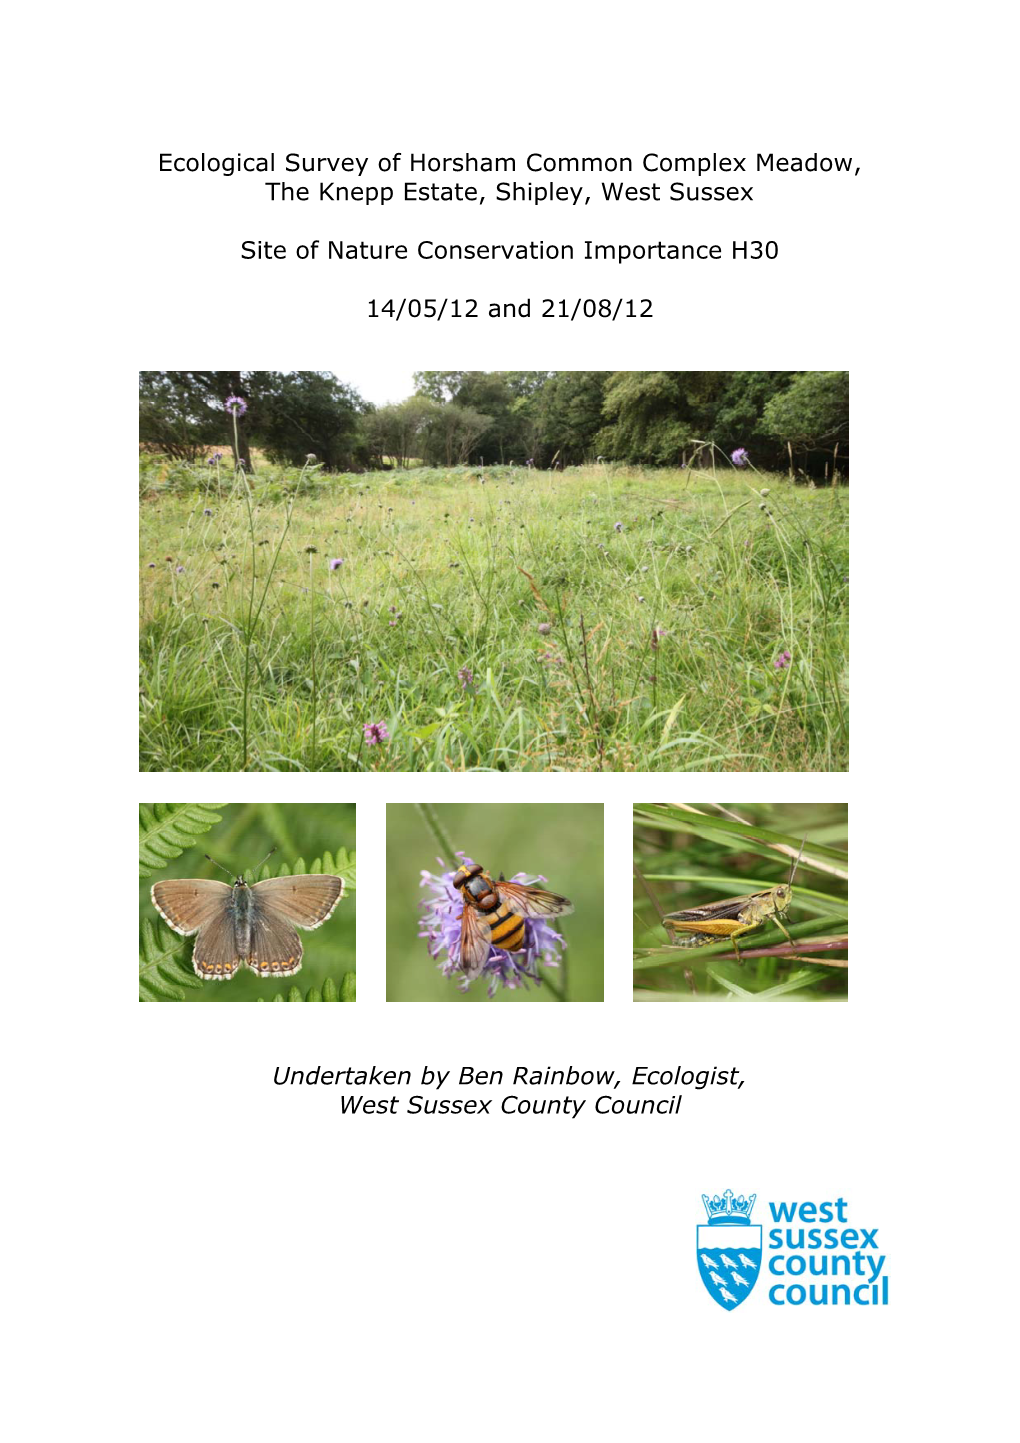 Ecological Survey of Horsham Common Complex Meadow, the Knepp Estate, Shipley, West Sussex